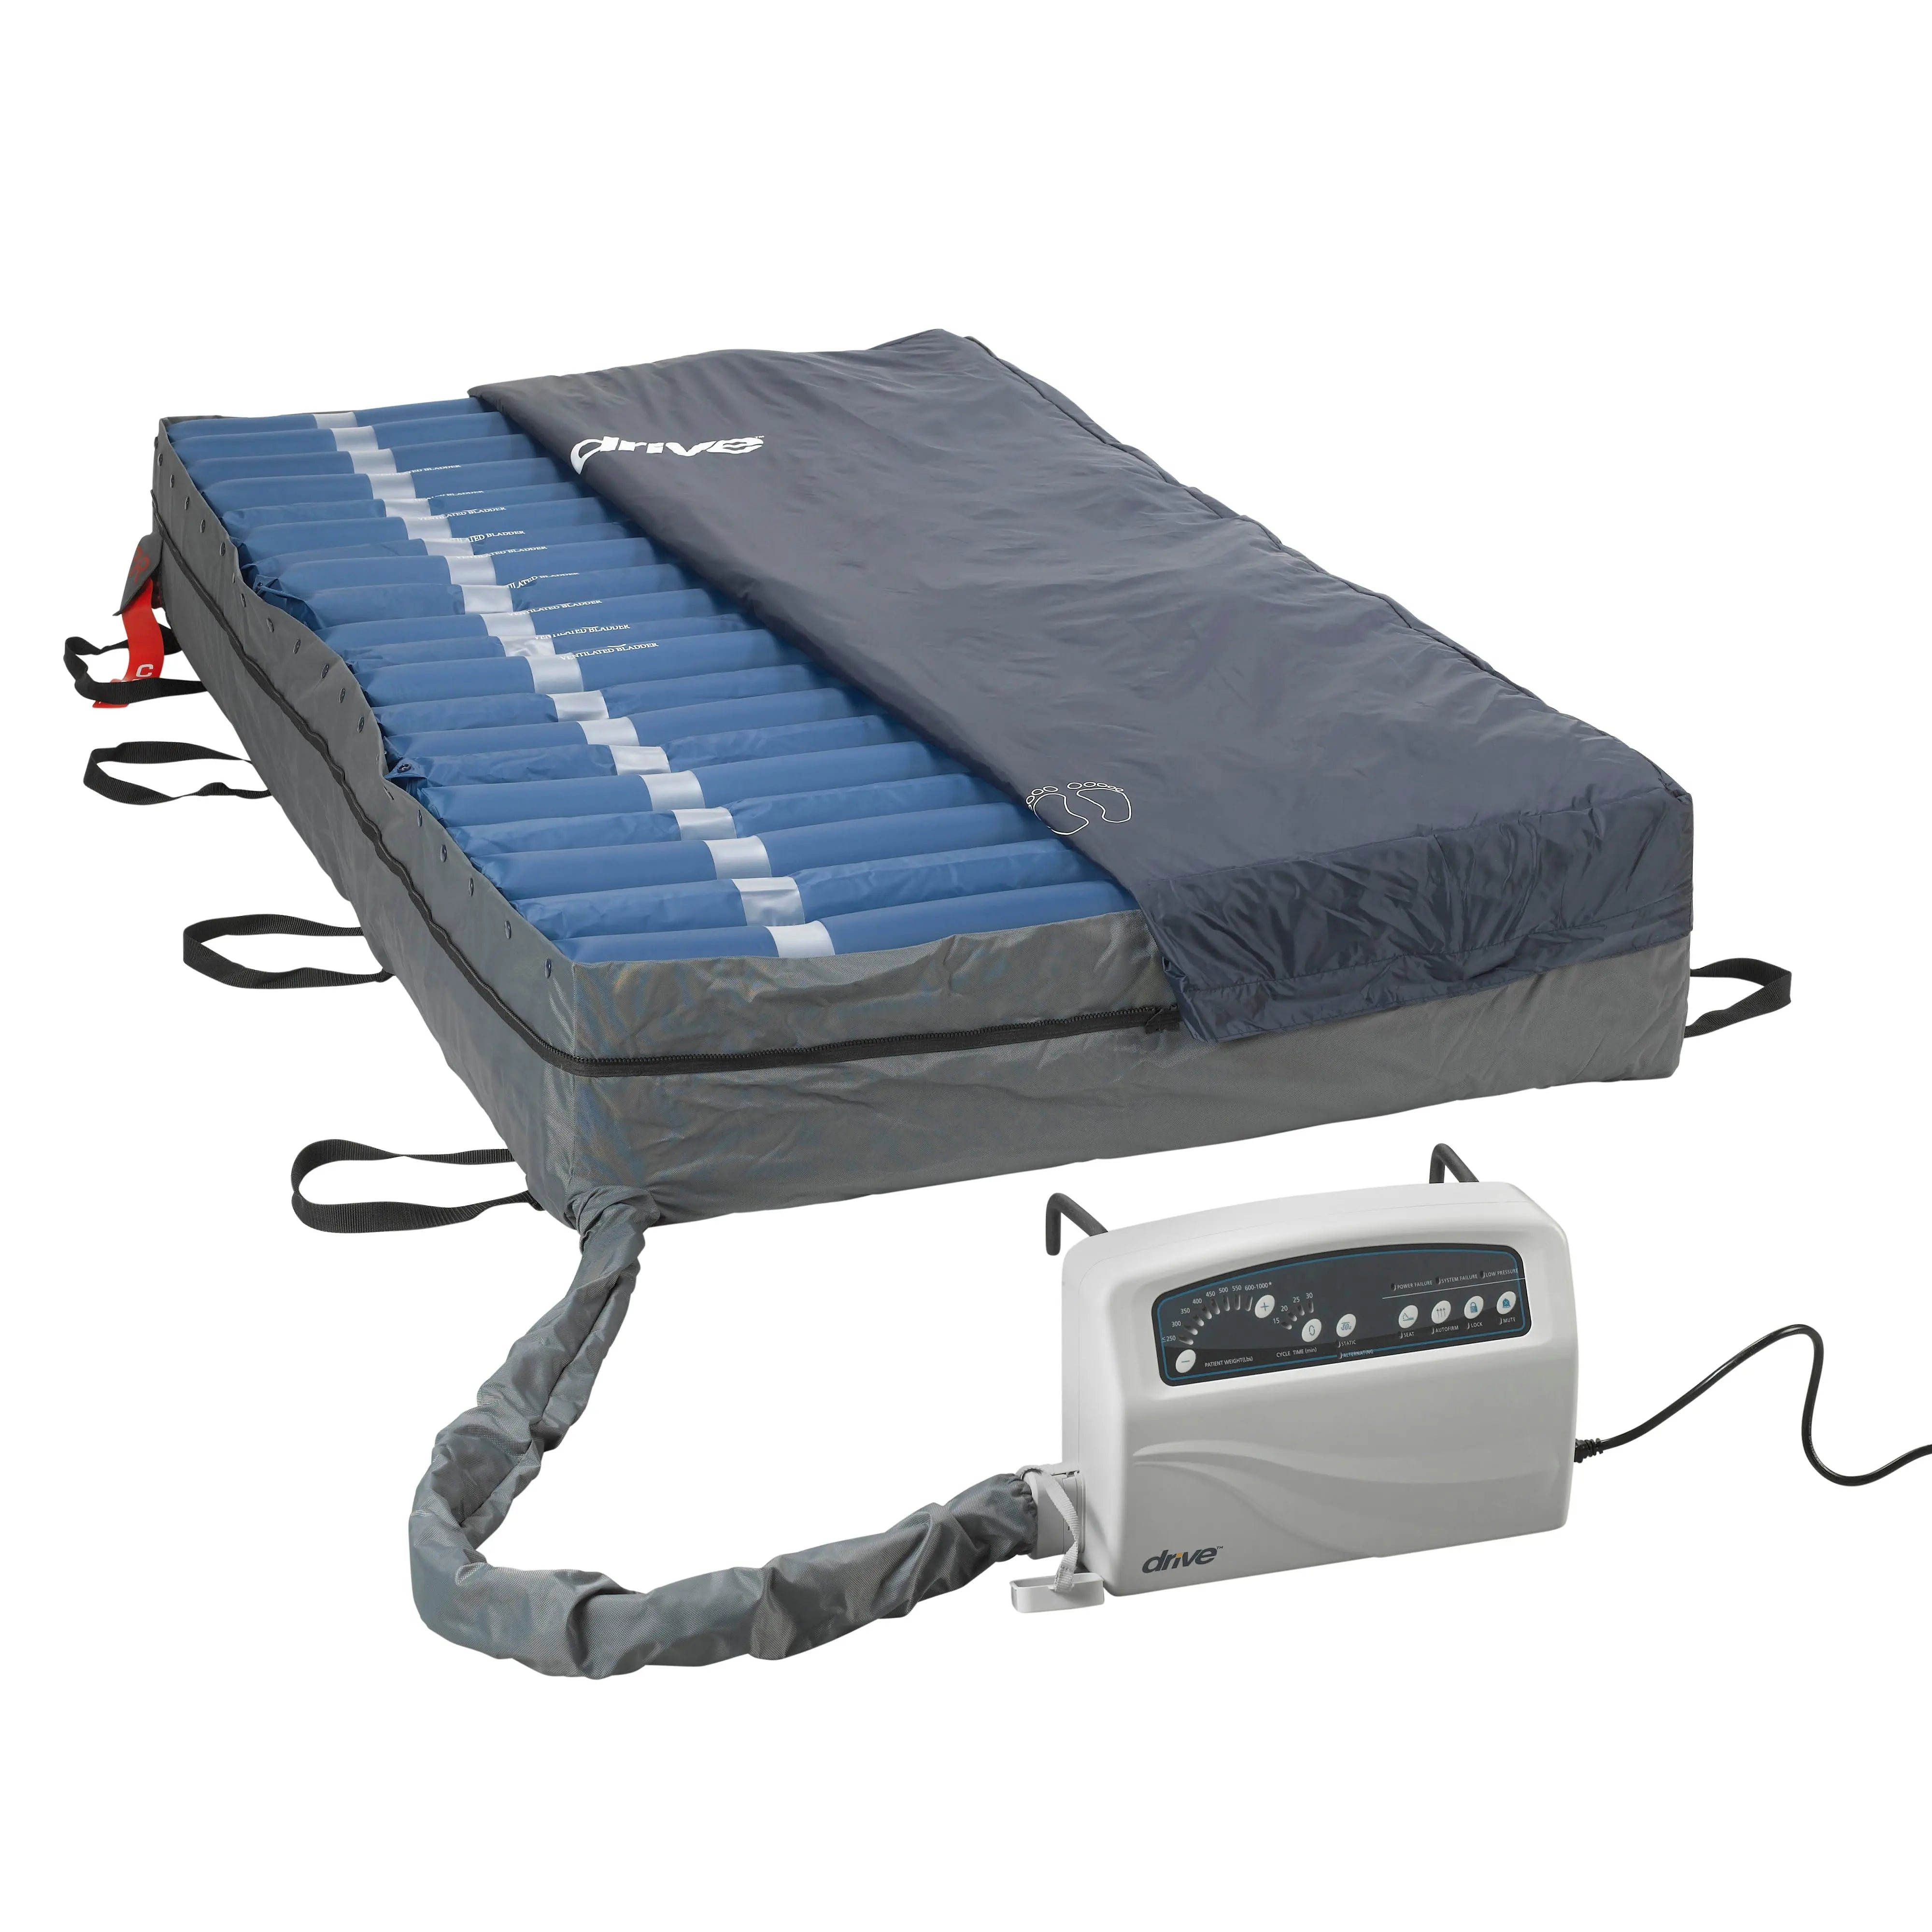 Med Aire Plus Bariatric Low Air Loss Mattress Replacement System, 80" x 54" - Home Health Store Inc